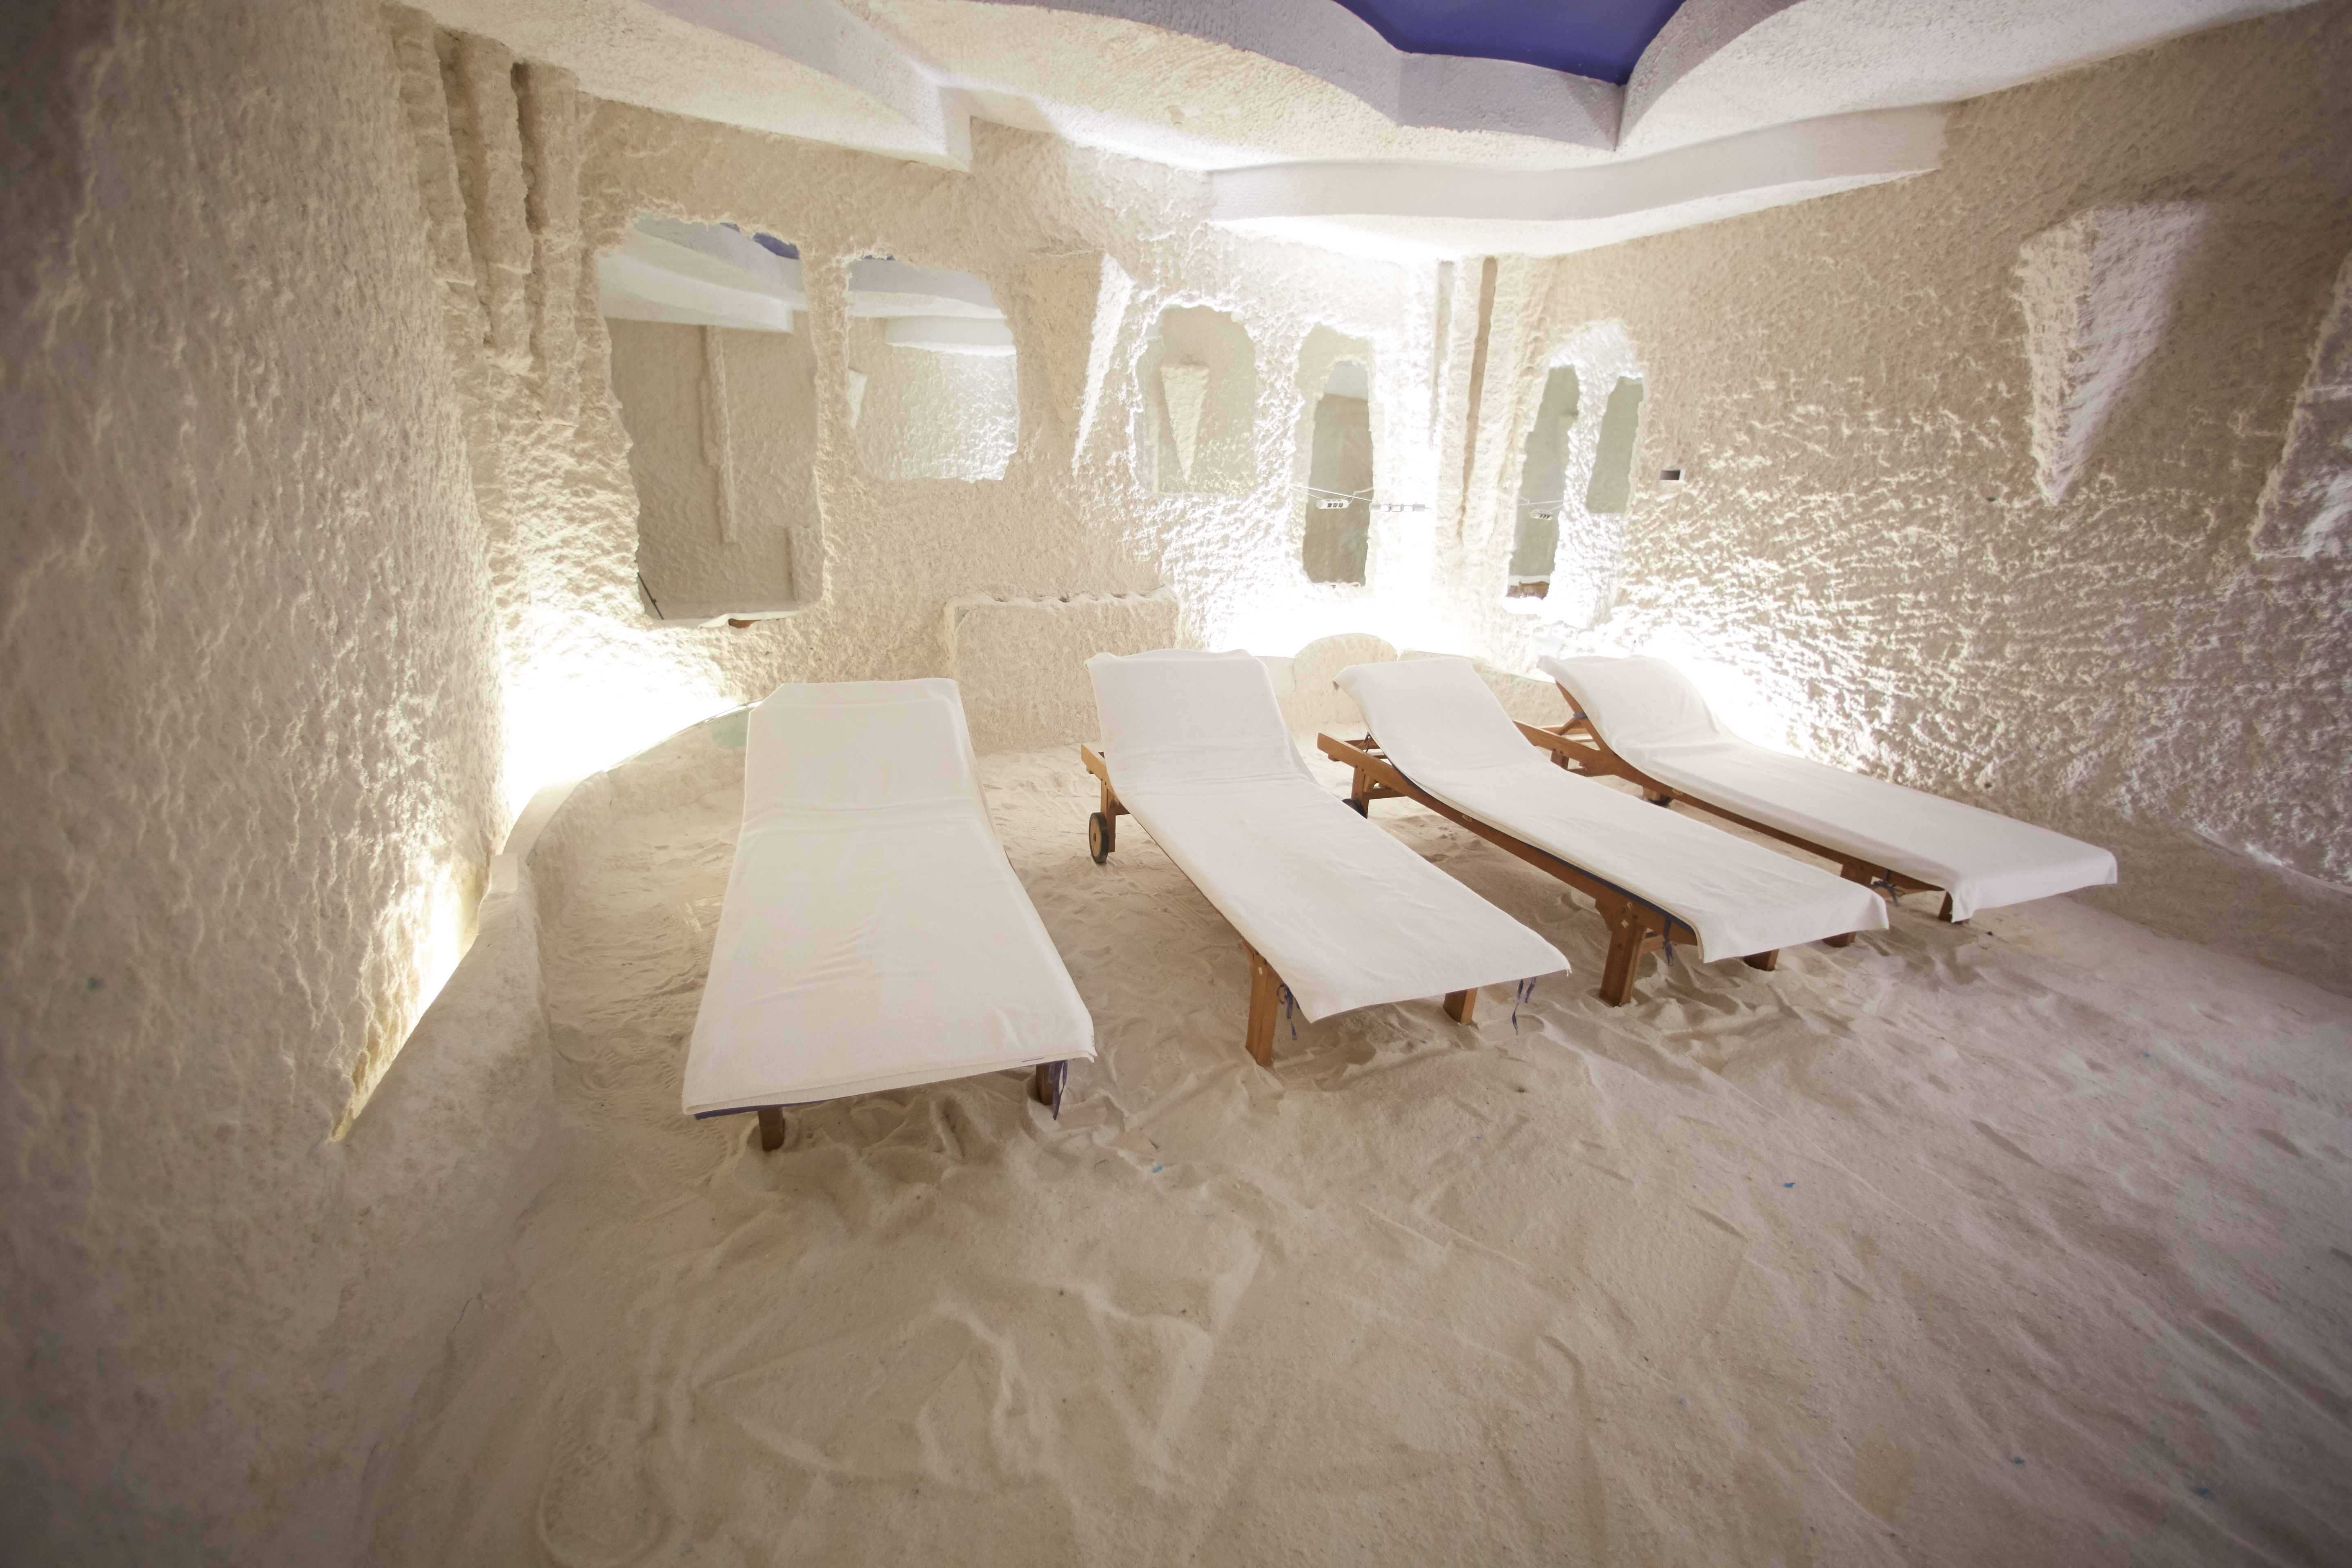 Beds in a salt cave